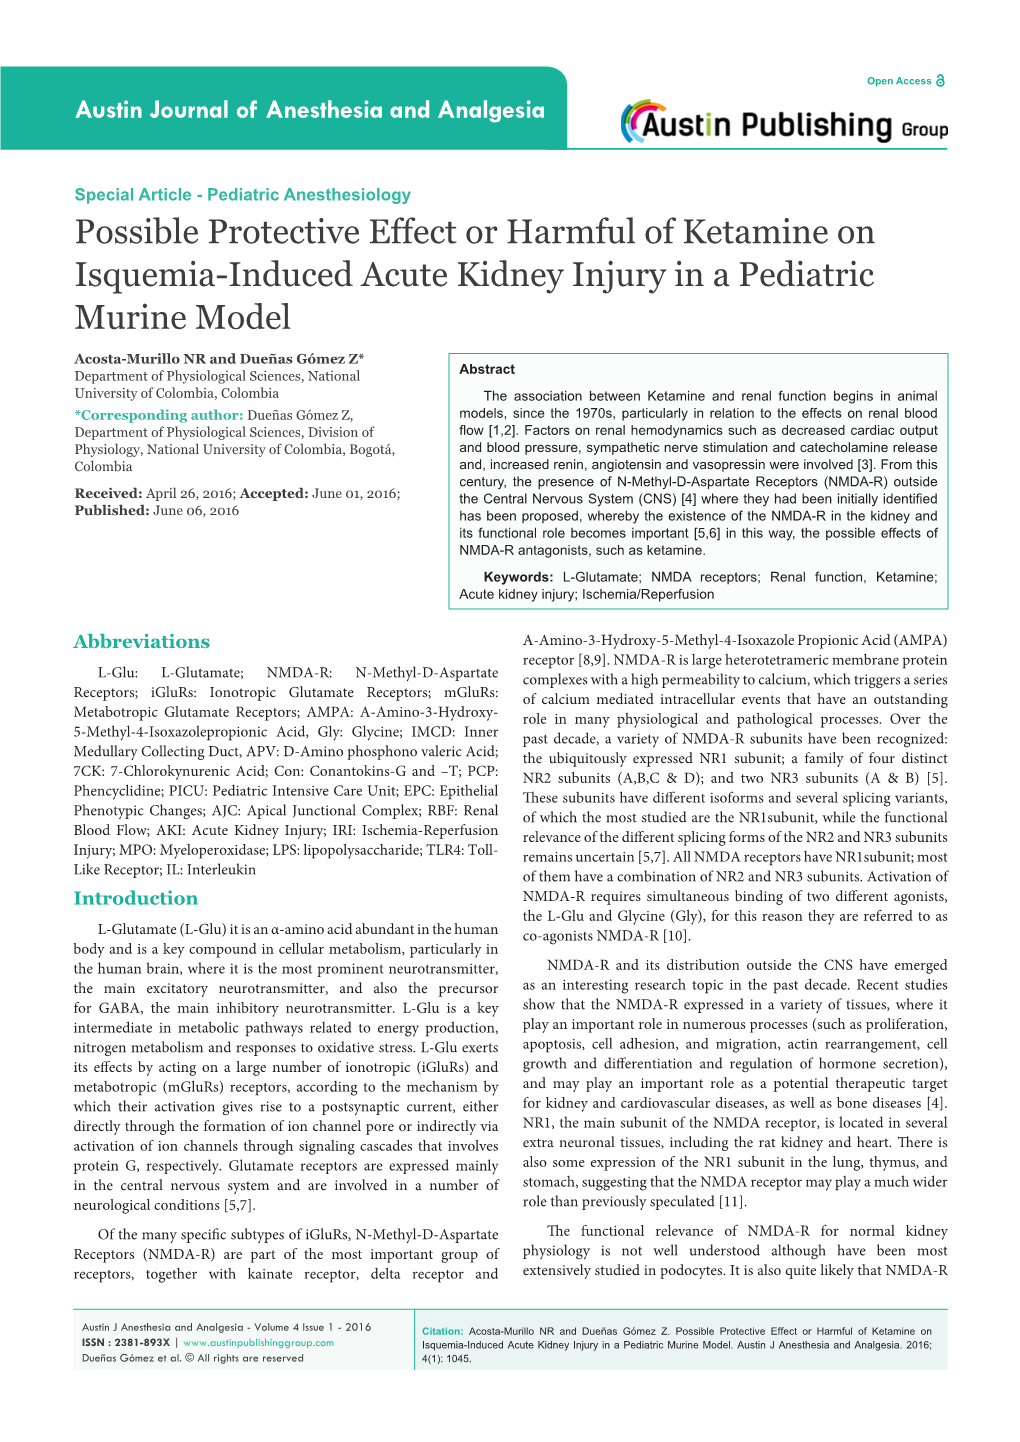 Possible Protective Effect Or Harmful of Ketamine on Isquemia-Induced Acute Kidney Injury in a Pediatric Murine Model